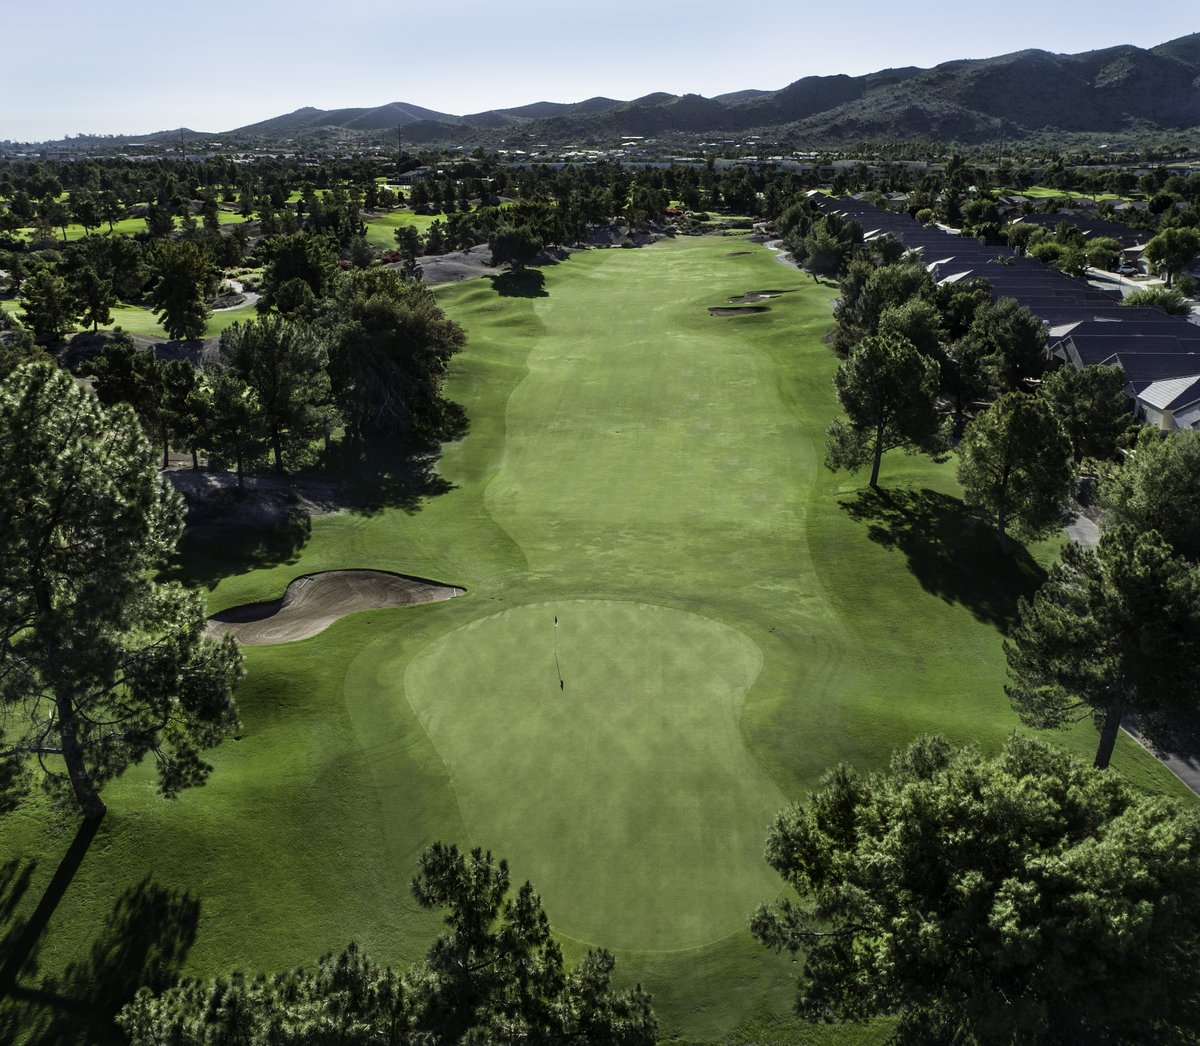 Feeling lucky number 13! ⛳️ Honored to be ranked #13 in the Top 25 Public Golf Courses in Arizona by Golfers' Choice for 2024. Come experience our stunning course and see why we're a golfer's paradise! 🏌️‍♂️🌵 #ArcisGolf #LiveConnectPlay #GolfersChoice #ArizonaGolf #LuckyNumber13